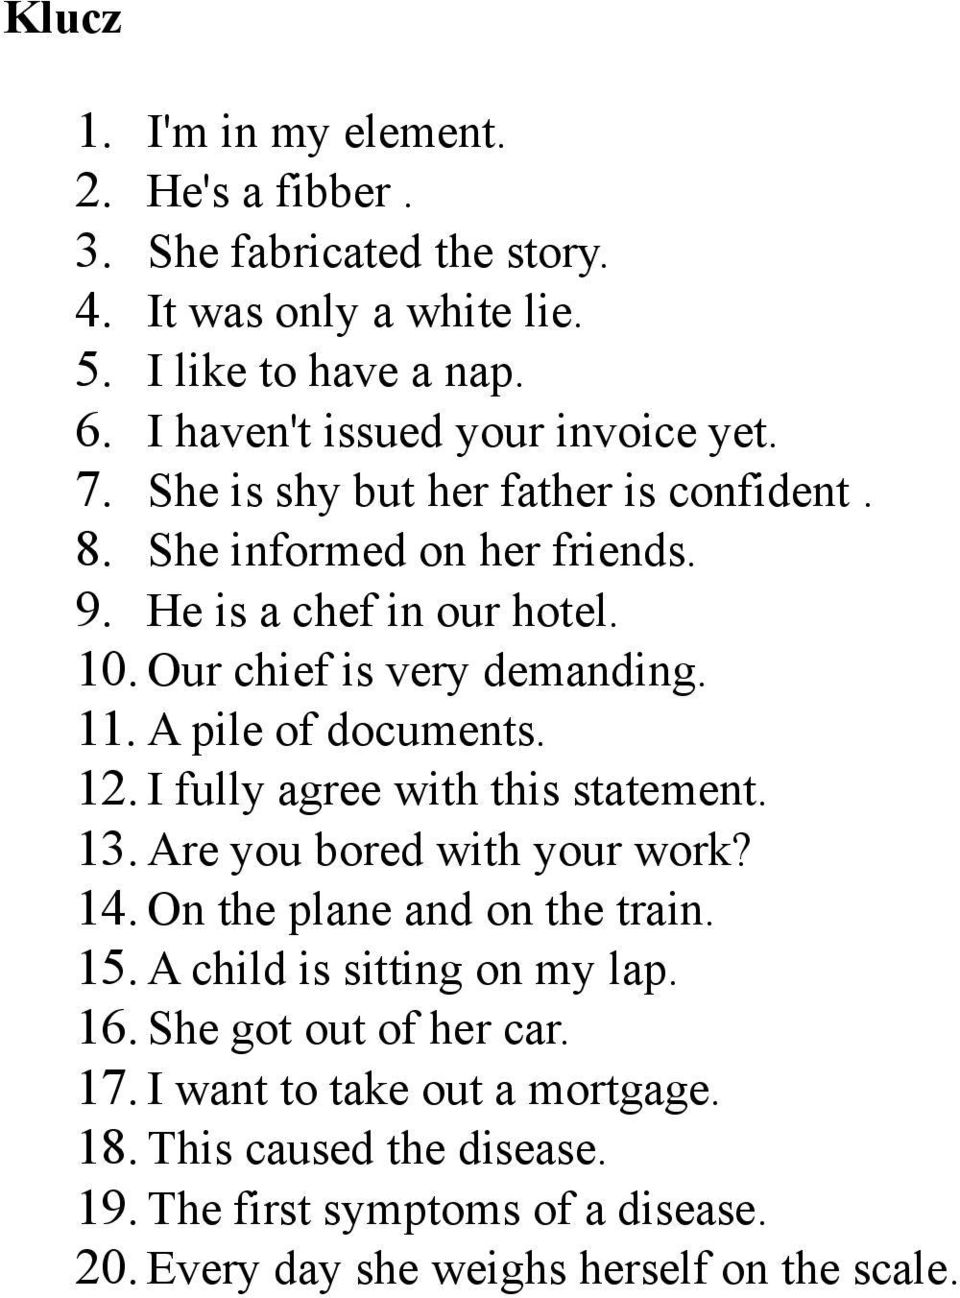 Our chief is very demanding. 11. A pile of documents. 12. I fully agree with this statement. 13. Are you bored with your work? 14. On the plane and on the train.